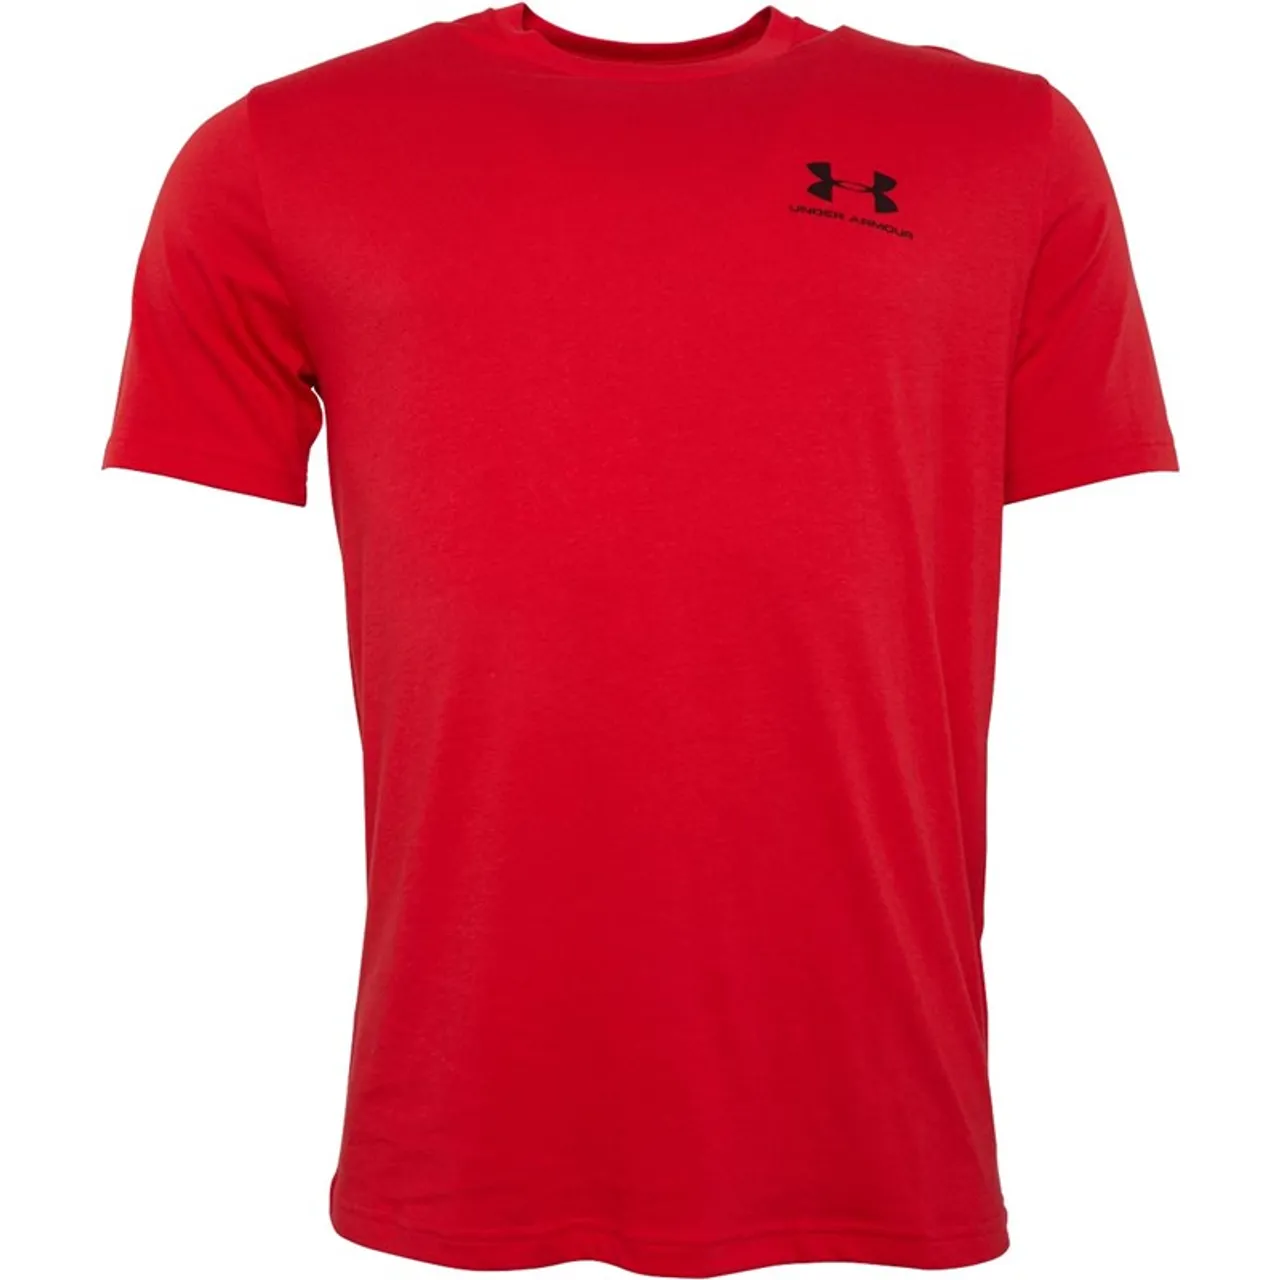 Under Armour Mens UA Sportstyle Left Chest Short Sleeve T-shirt Red/Black